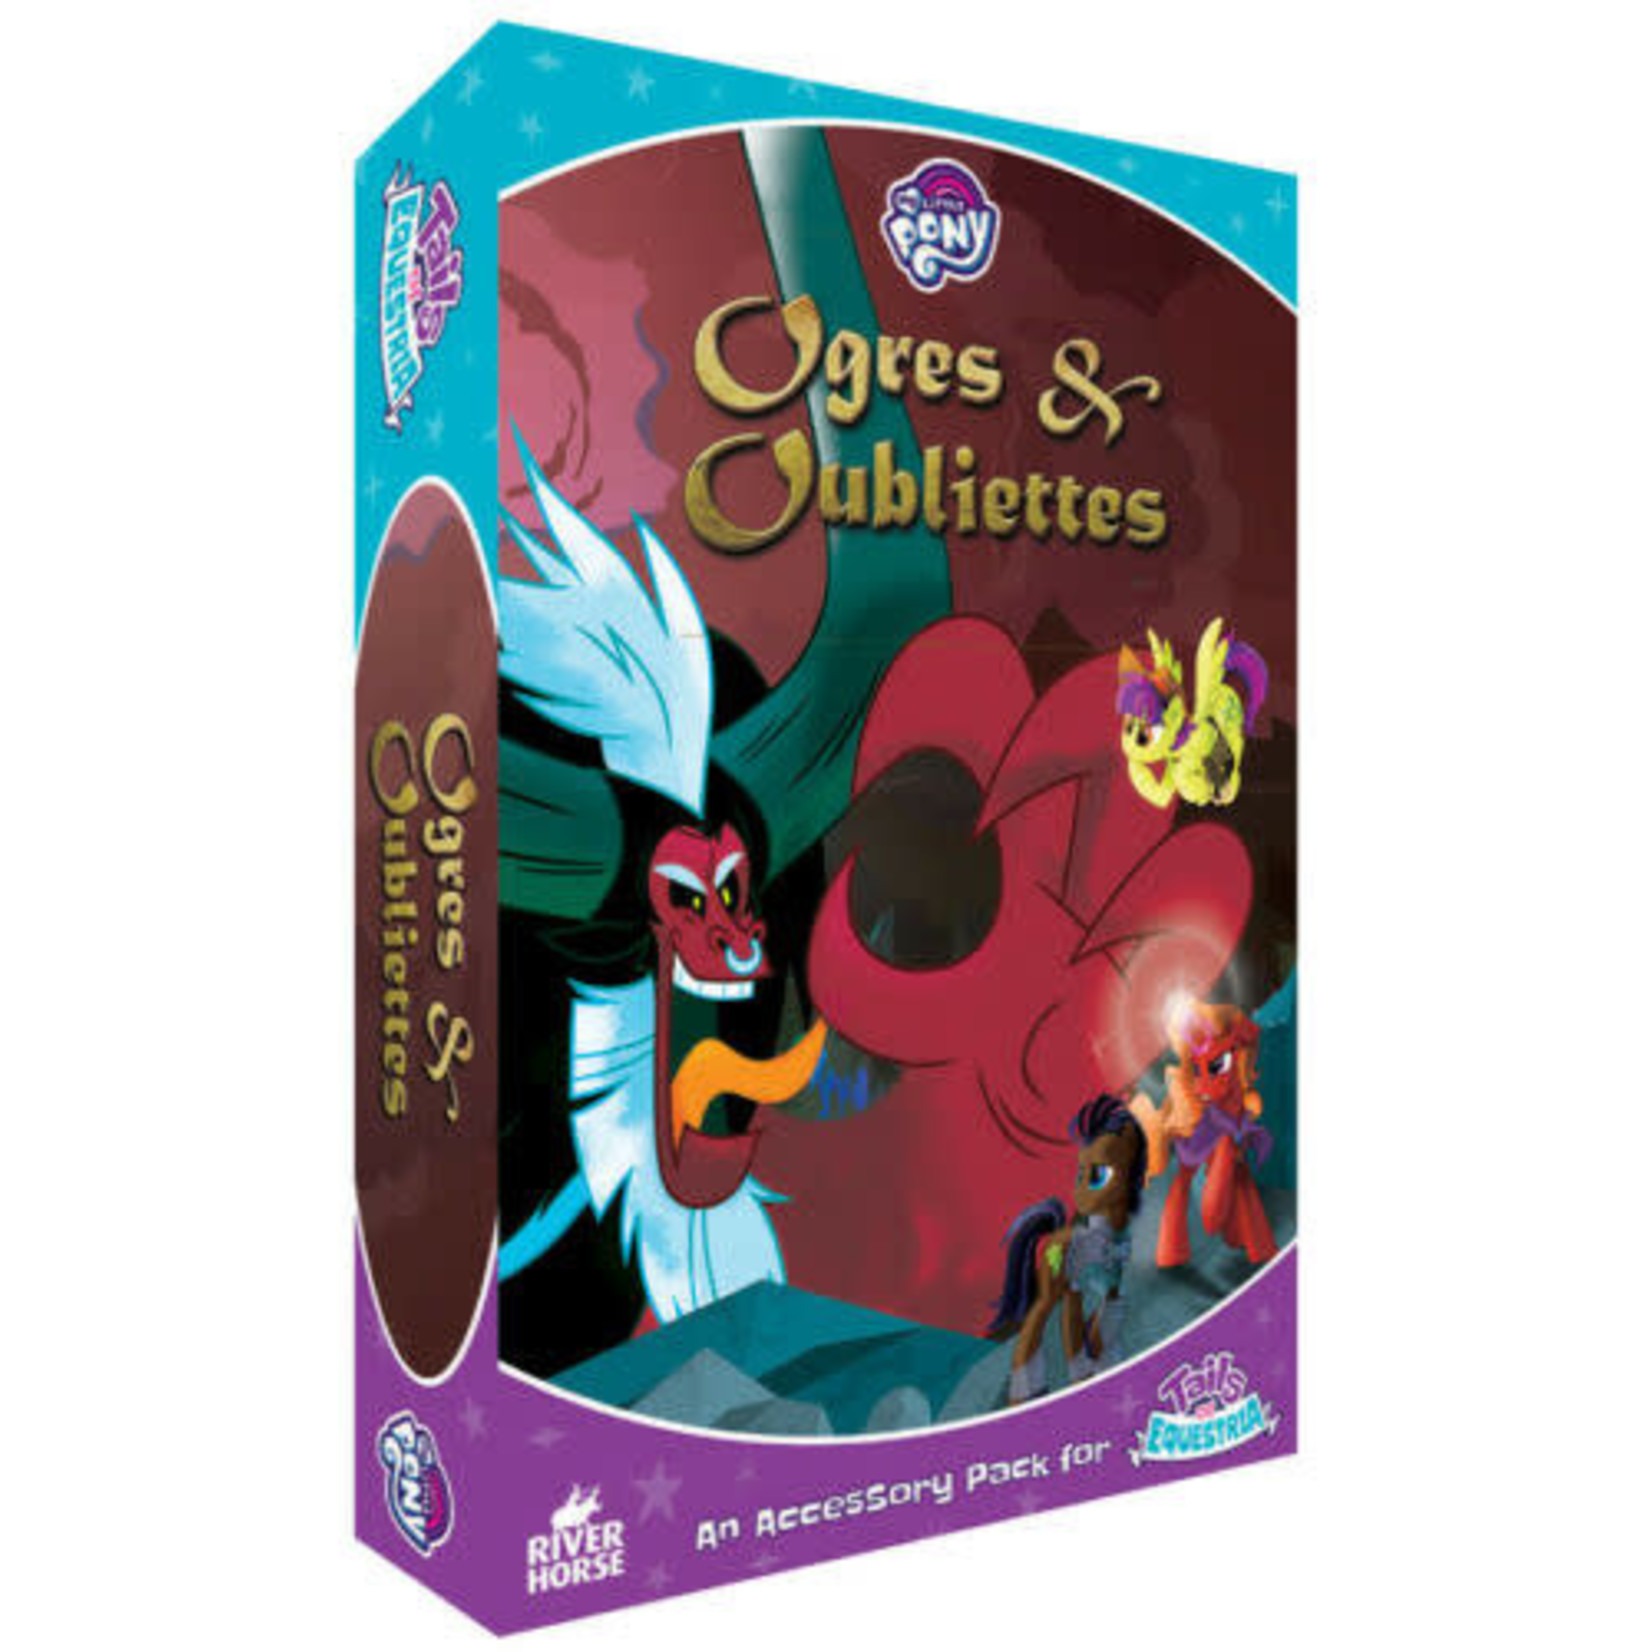 River Horse Games My Little Pony Storytelling Game: Tails of Equestria: Ogres & Oubliettes